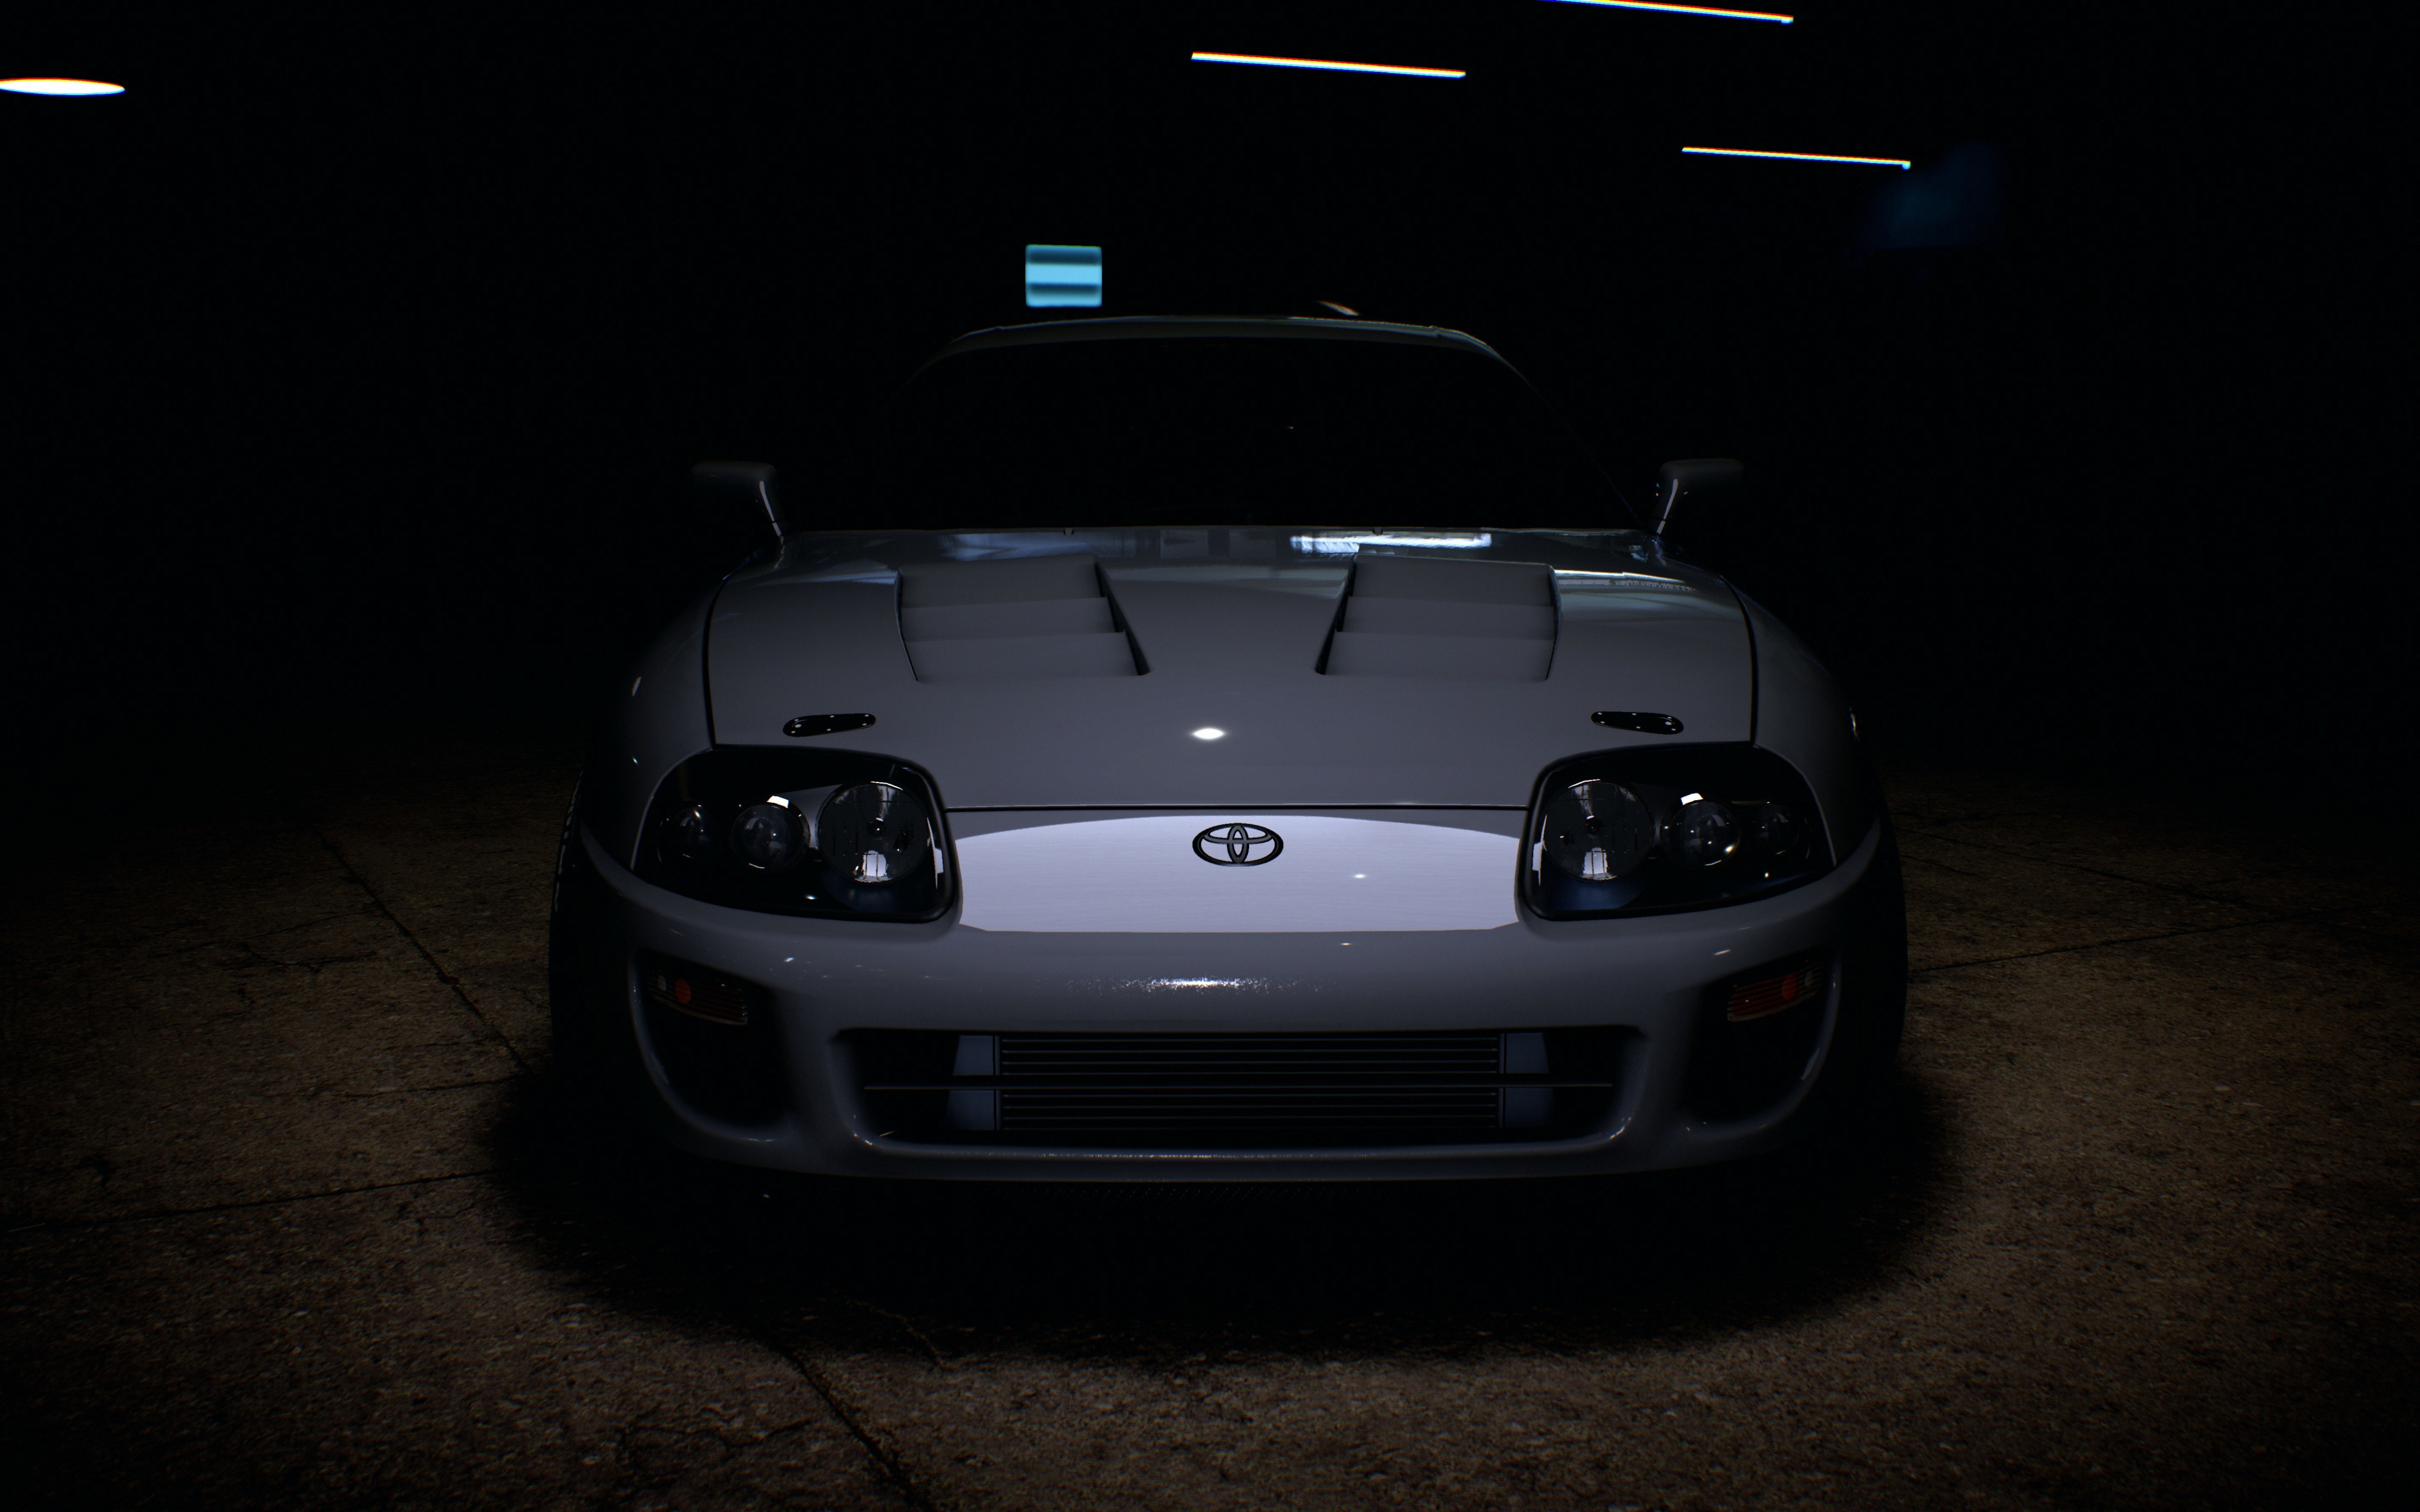 Download 3840x2400 Wallpaper Grey Toyota Supra Vidoe Game Need For Speed 4k Ultra Hd 16 10 Widescreen 3840x2400 Hd Image Background 7240